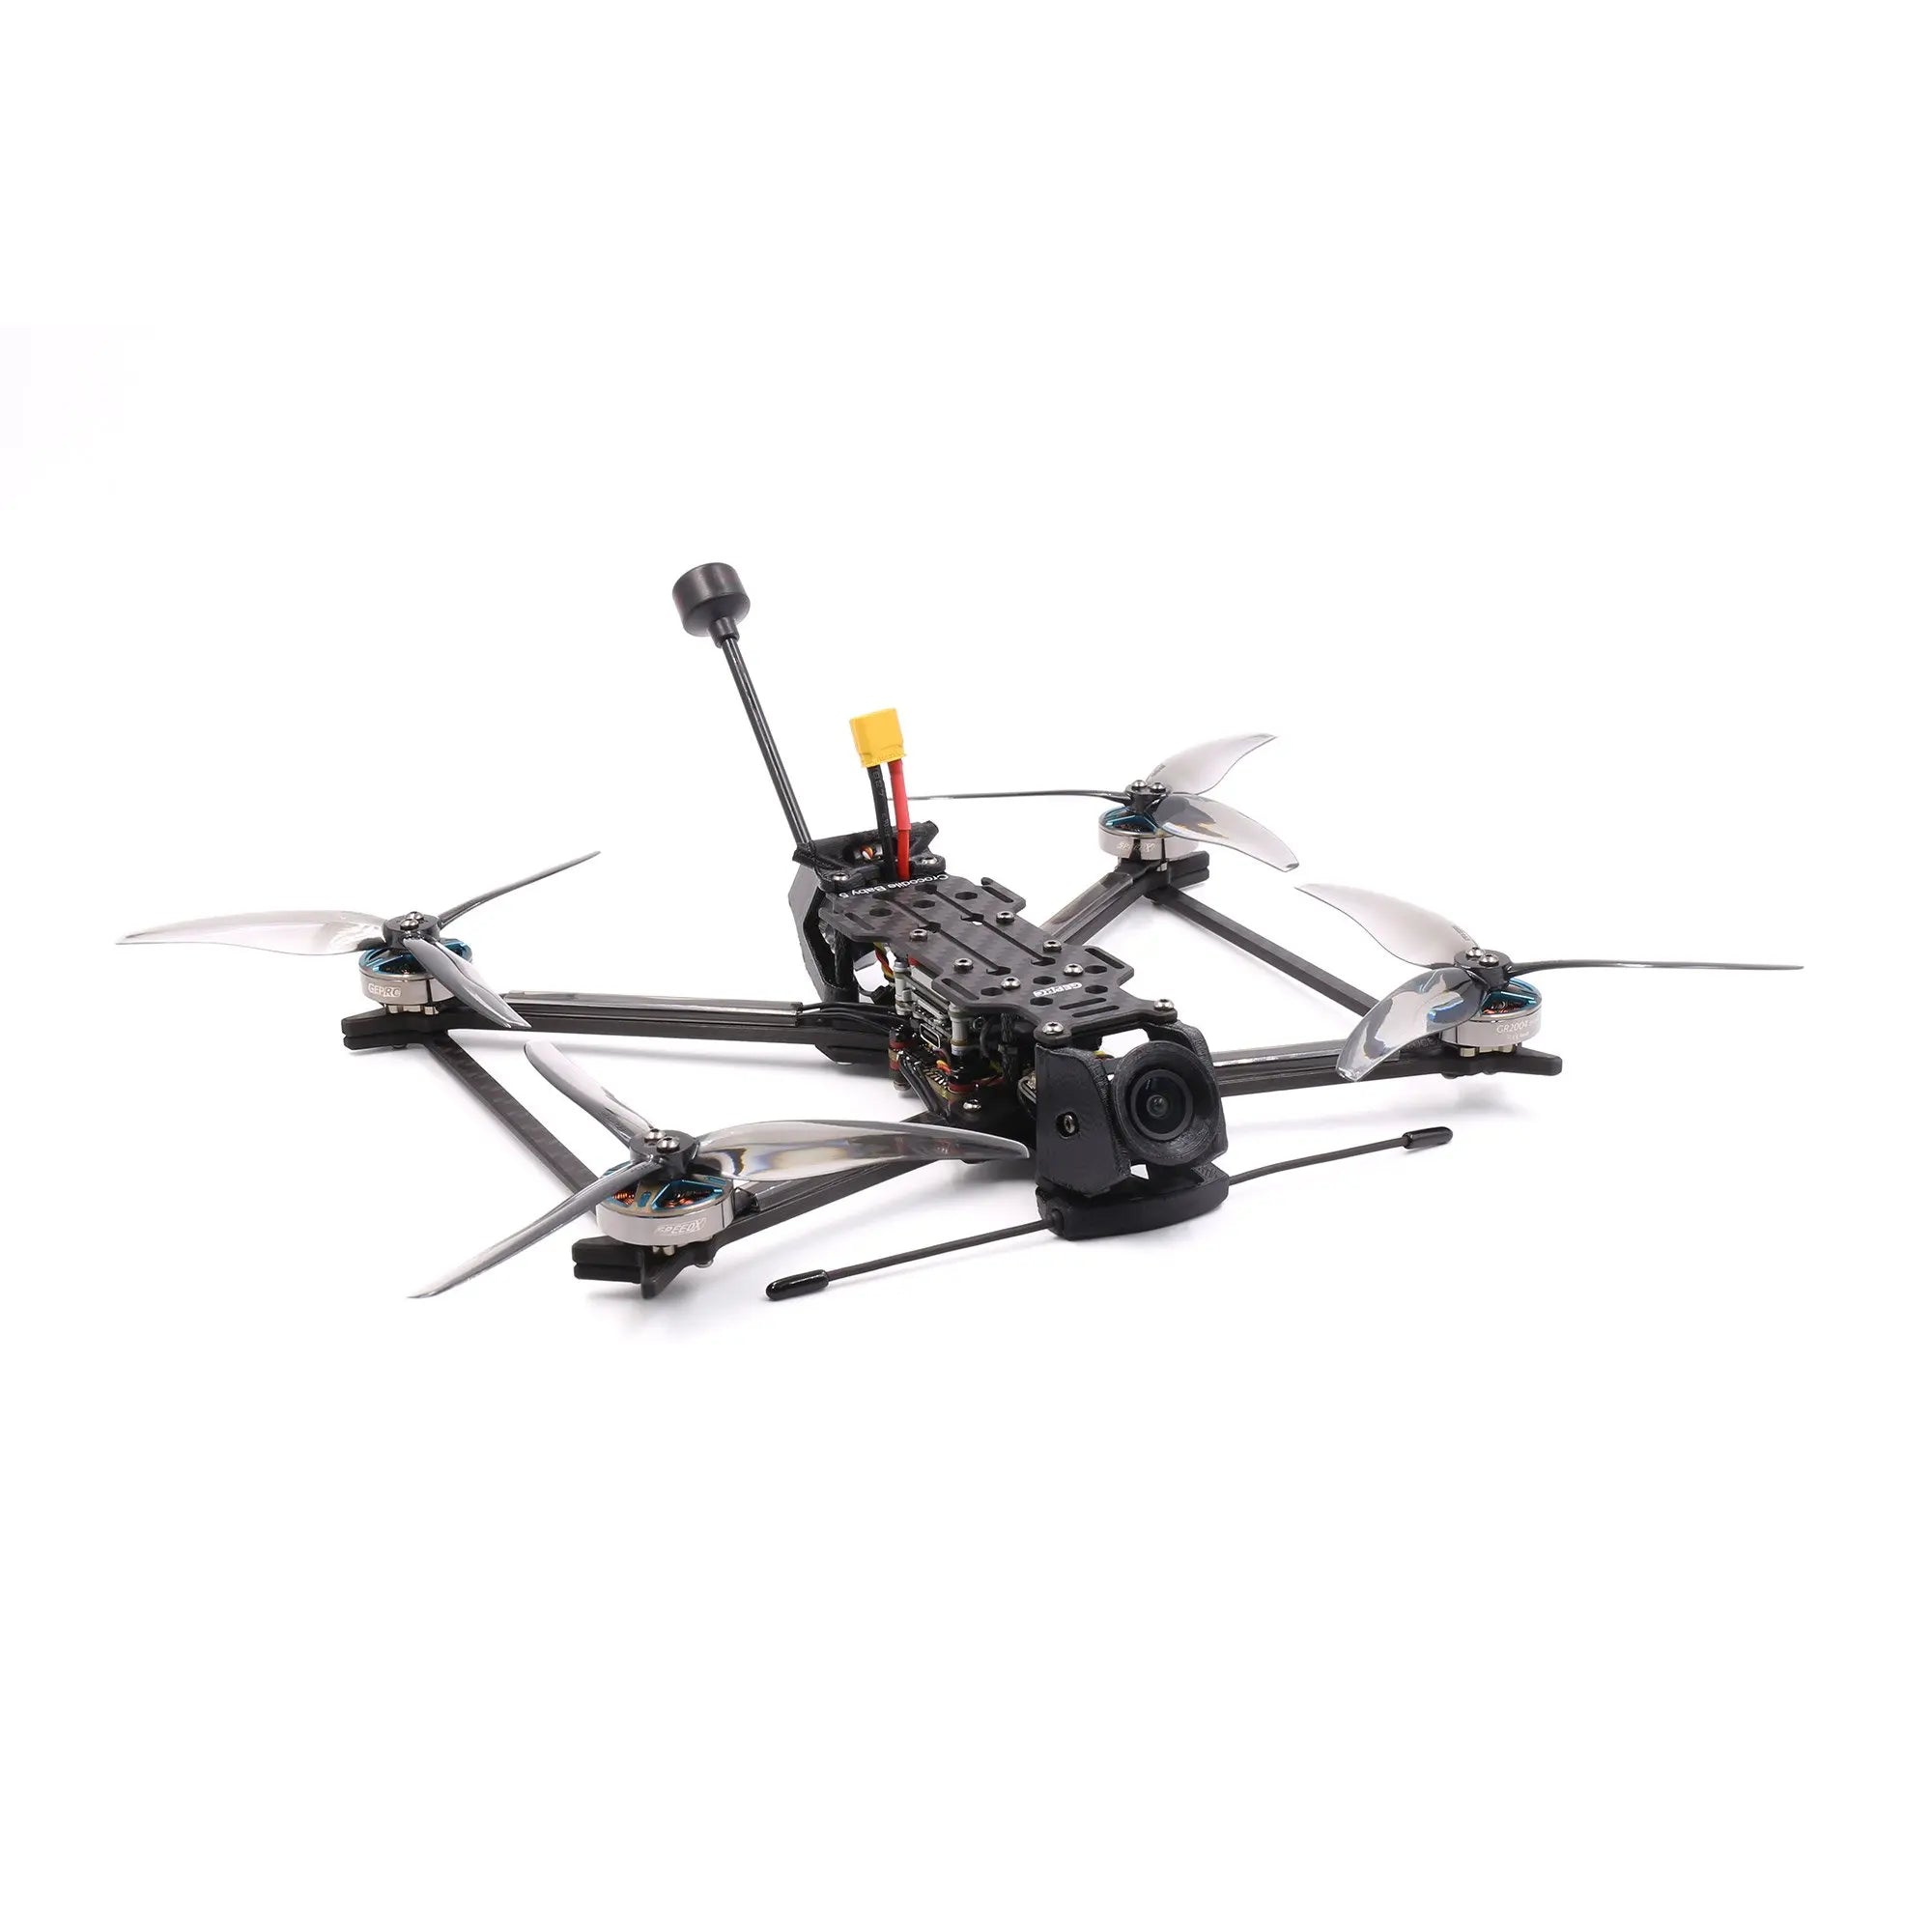 GEPRC Crocodile5 Baby FPV Drone, built with a carbon fiber reinforced frame and equipped with LR HD Polar LongRange 